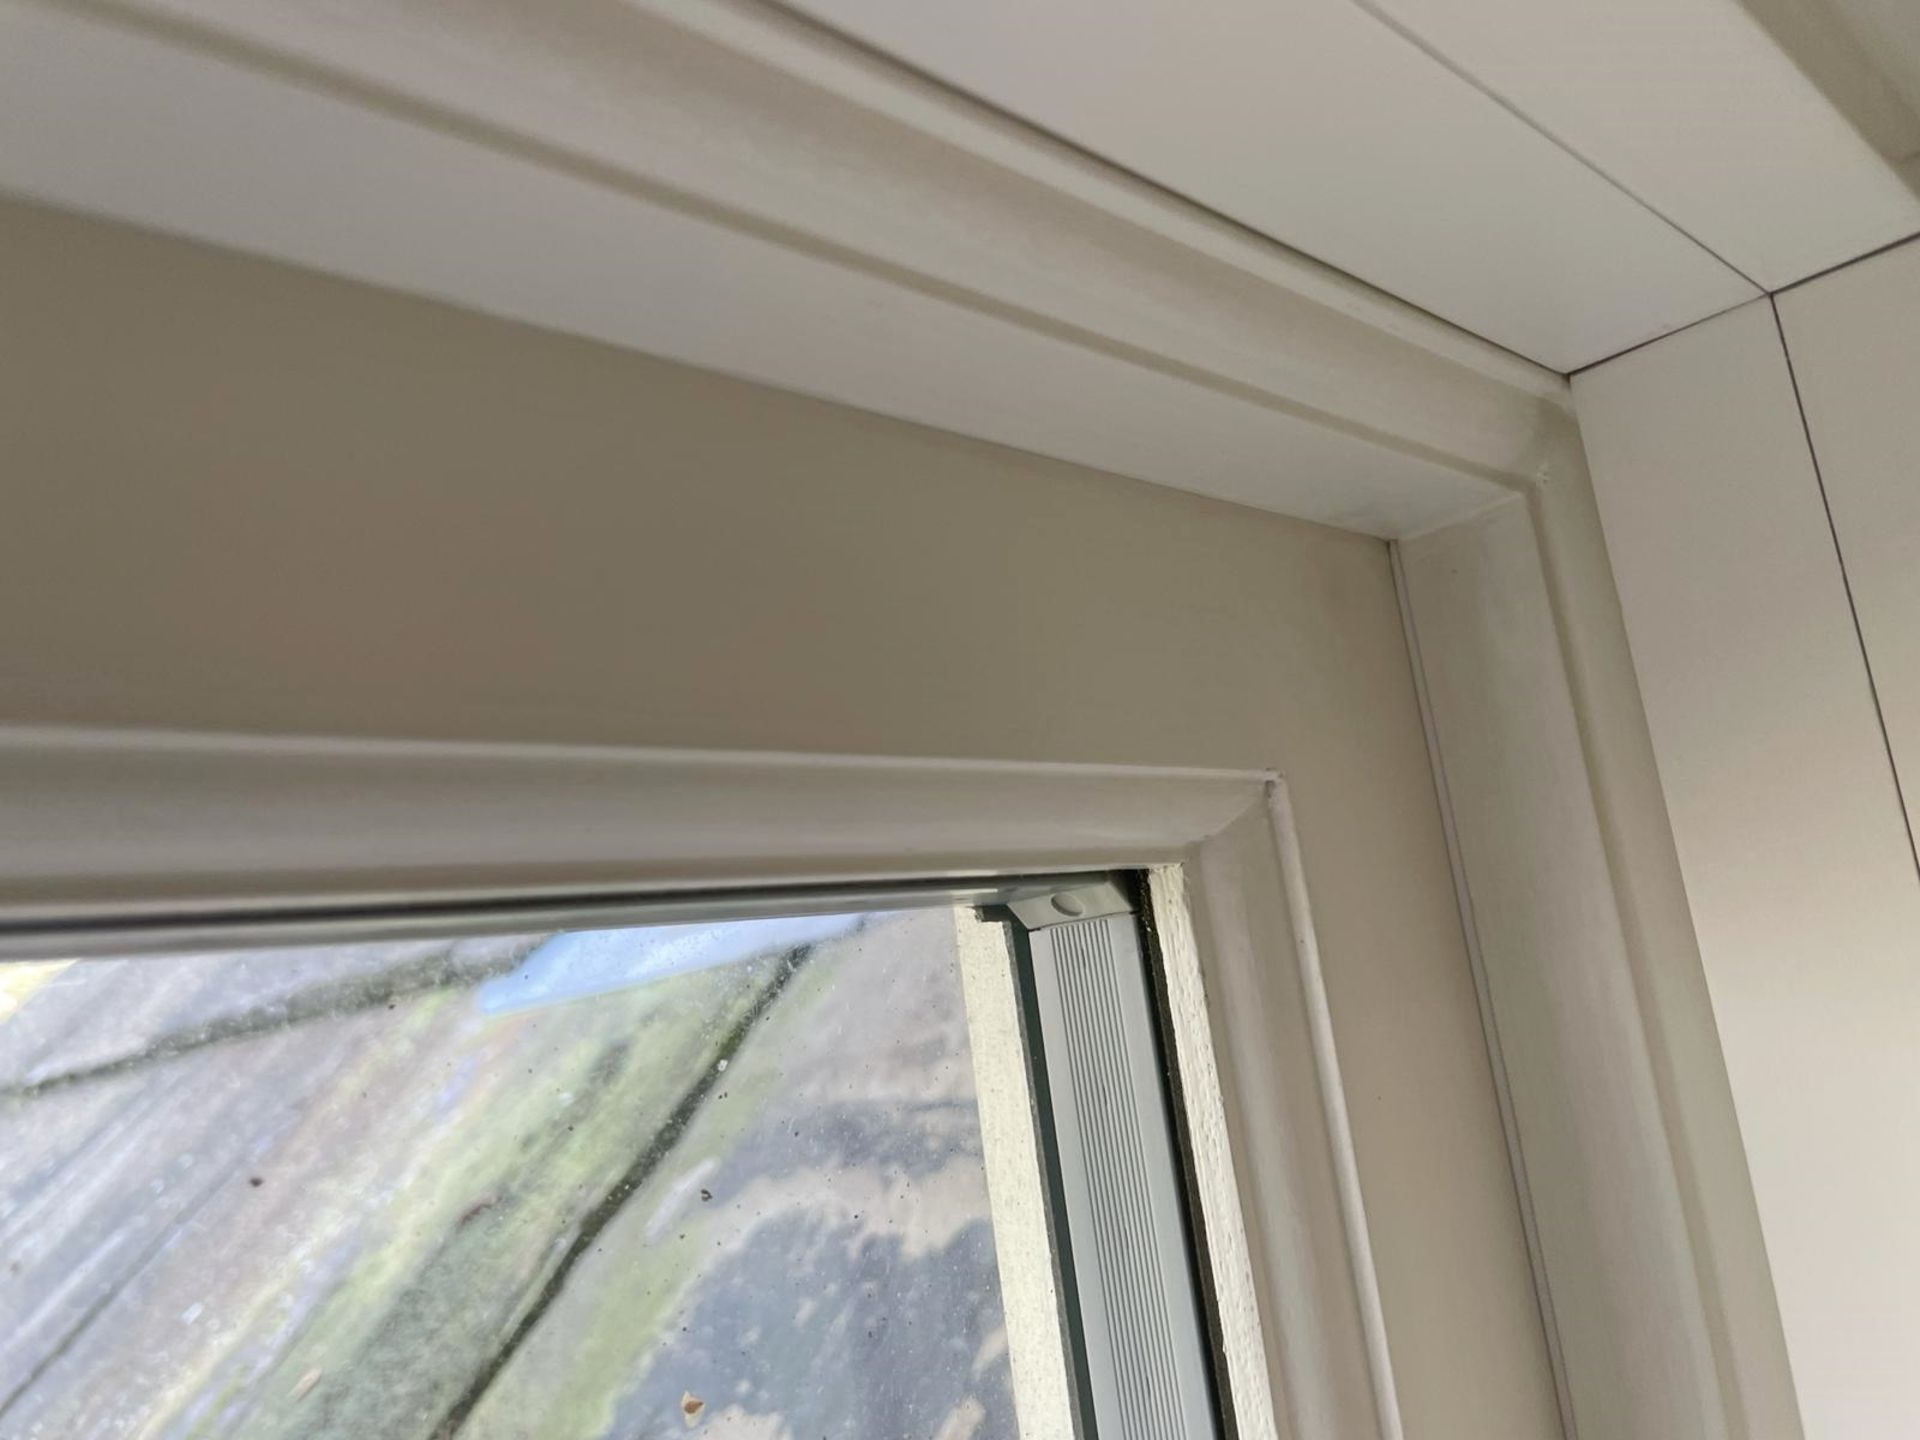 1 x Hardwood Timber Double Glazed Leaded 3-Pane Window Frame fitted with Shutter Blinds - Image 5 of 12